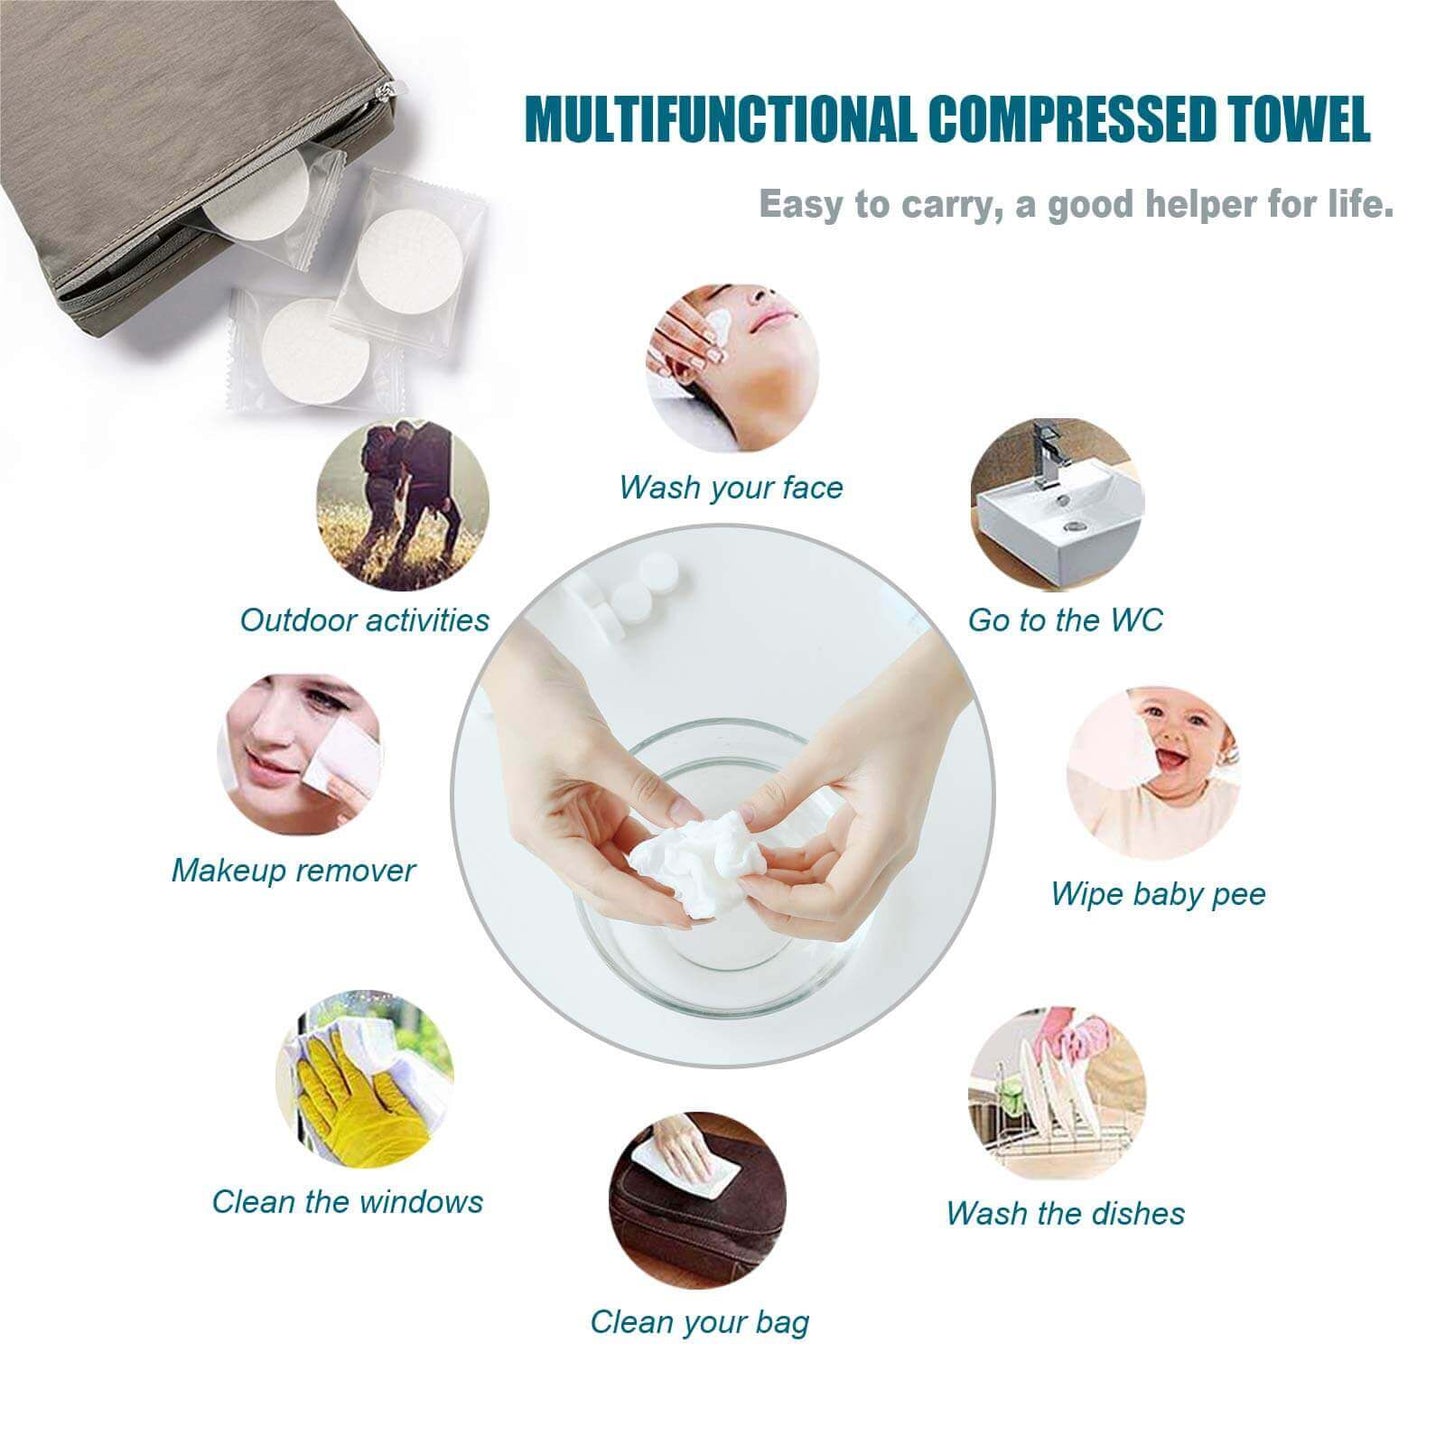 disposable compressed towel tablets, multipurpose